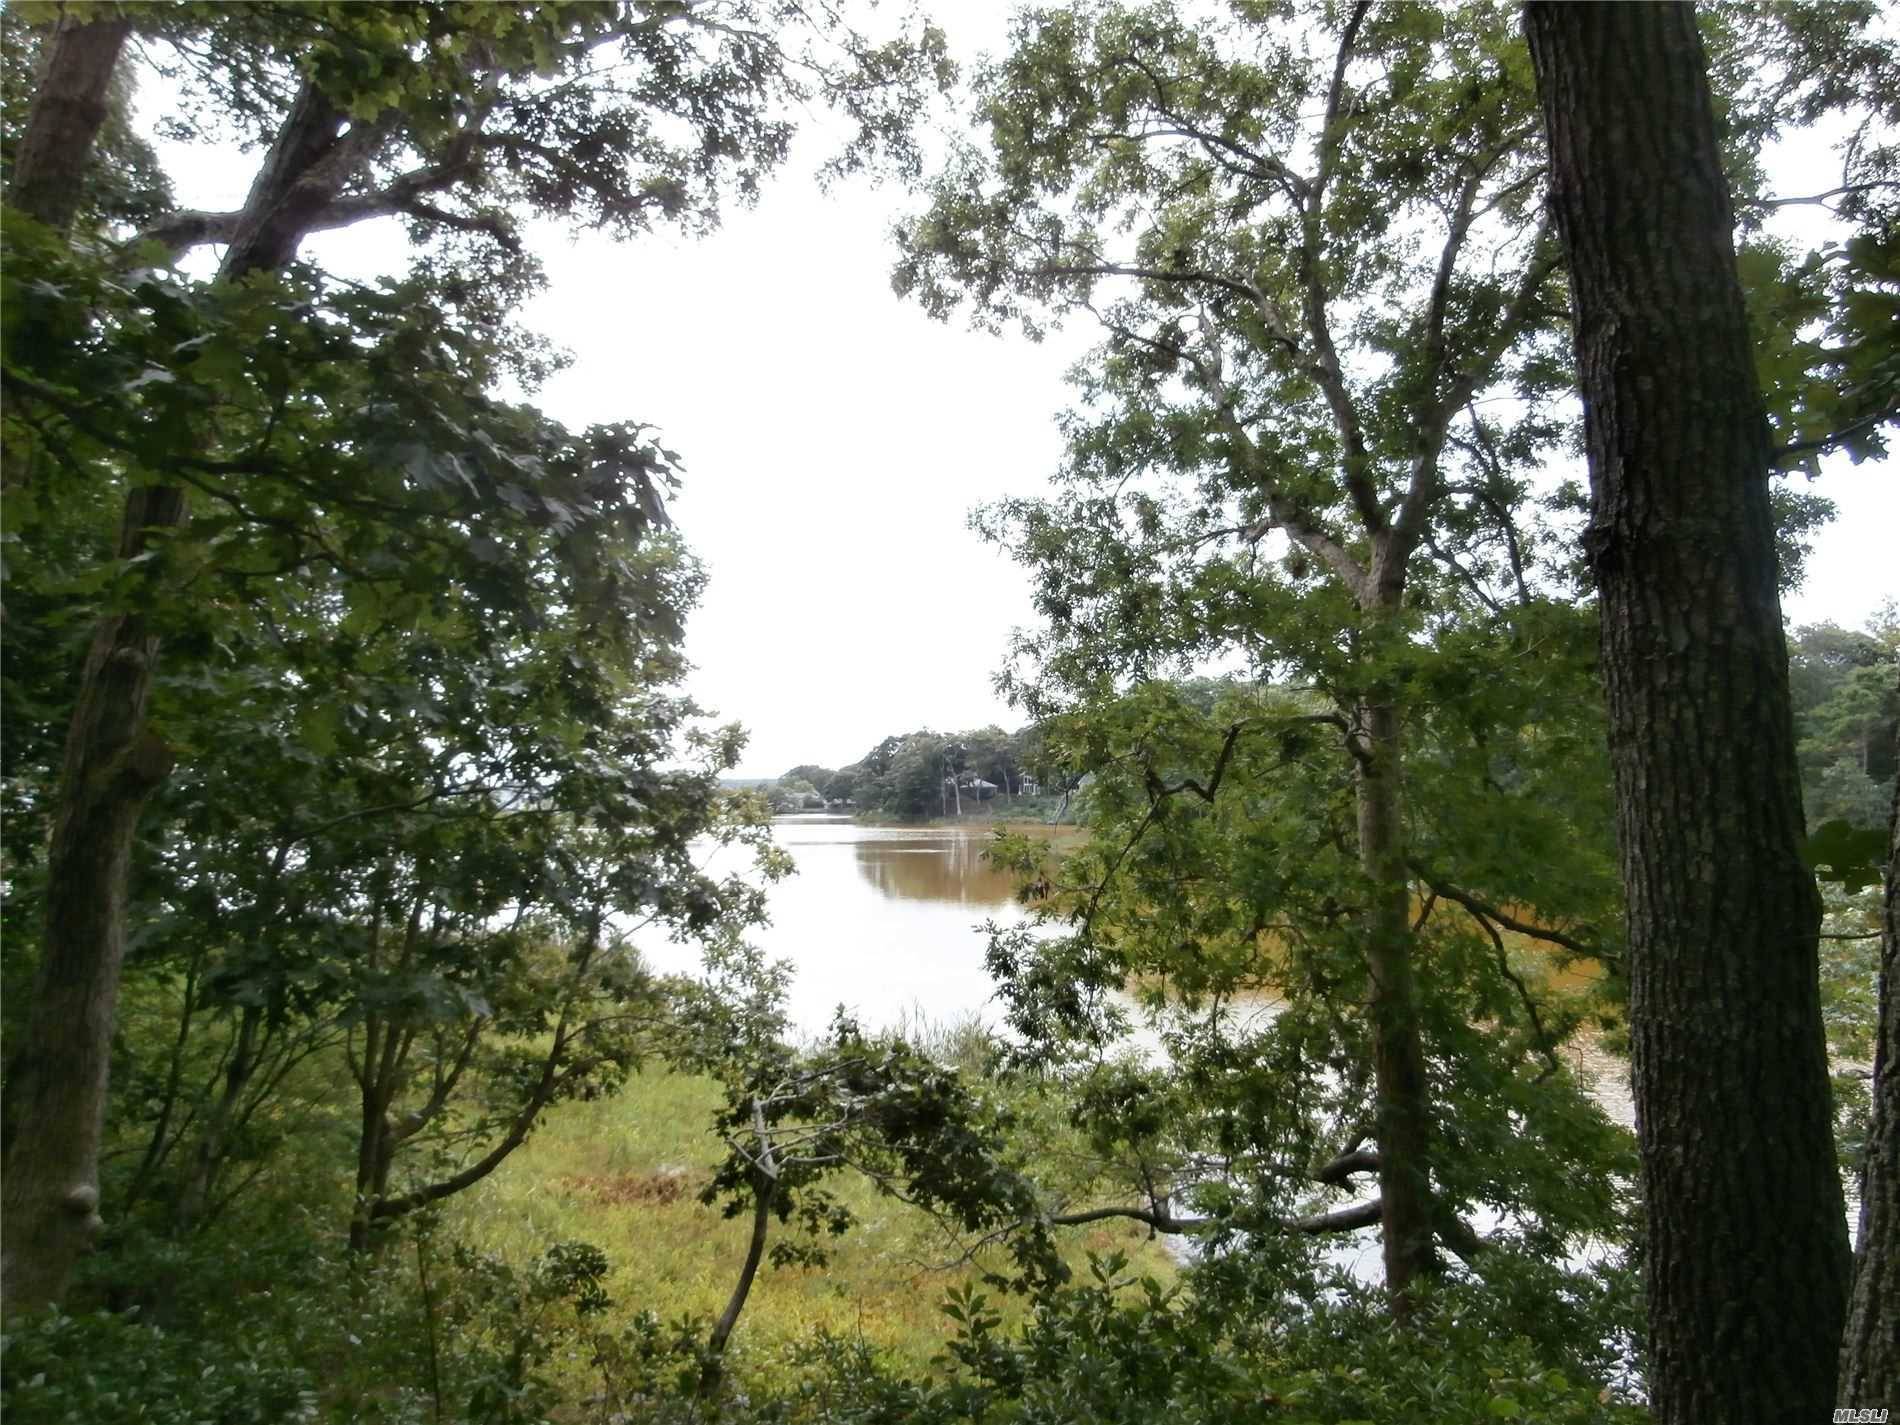 On Marion Lake. 1 Acre Lake Front Wooded Property with 1960s Ranch Home and Detached Garage.